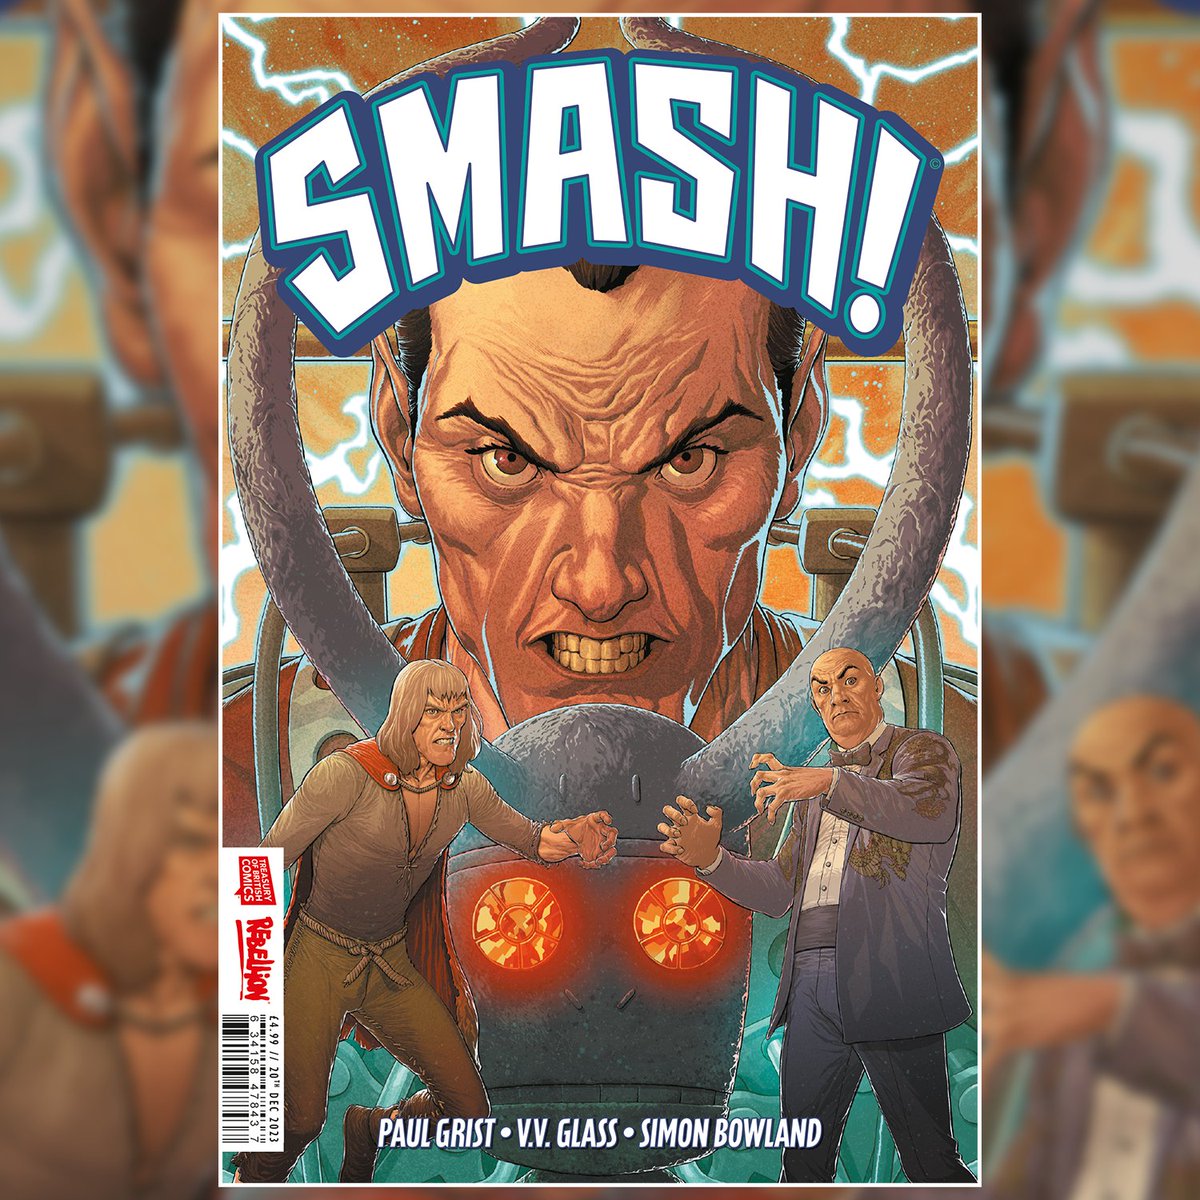 OUT NOW! The Spider takes on Cursitor Doom and Adam Eterno in the final issue of Smash! Get your copy of the concluding third issue of the miniseries, by @mistergrist and @Ana_Dapta, today! bit.ly/3RQwX2X